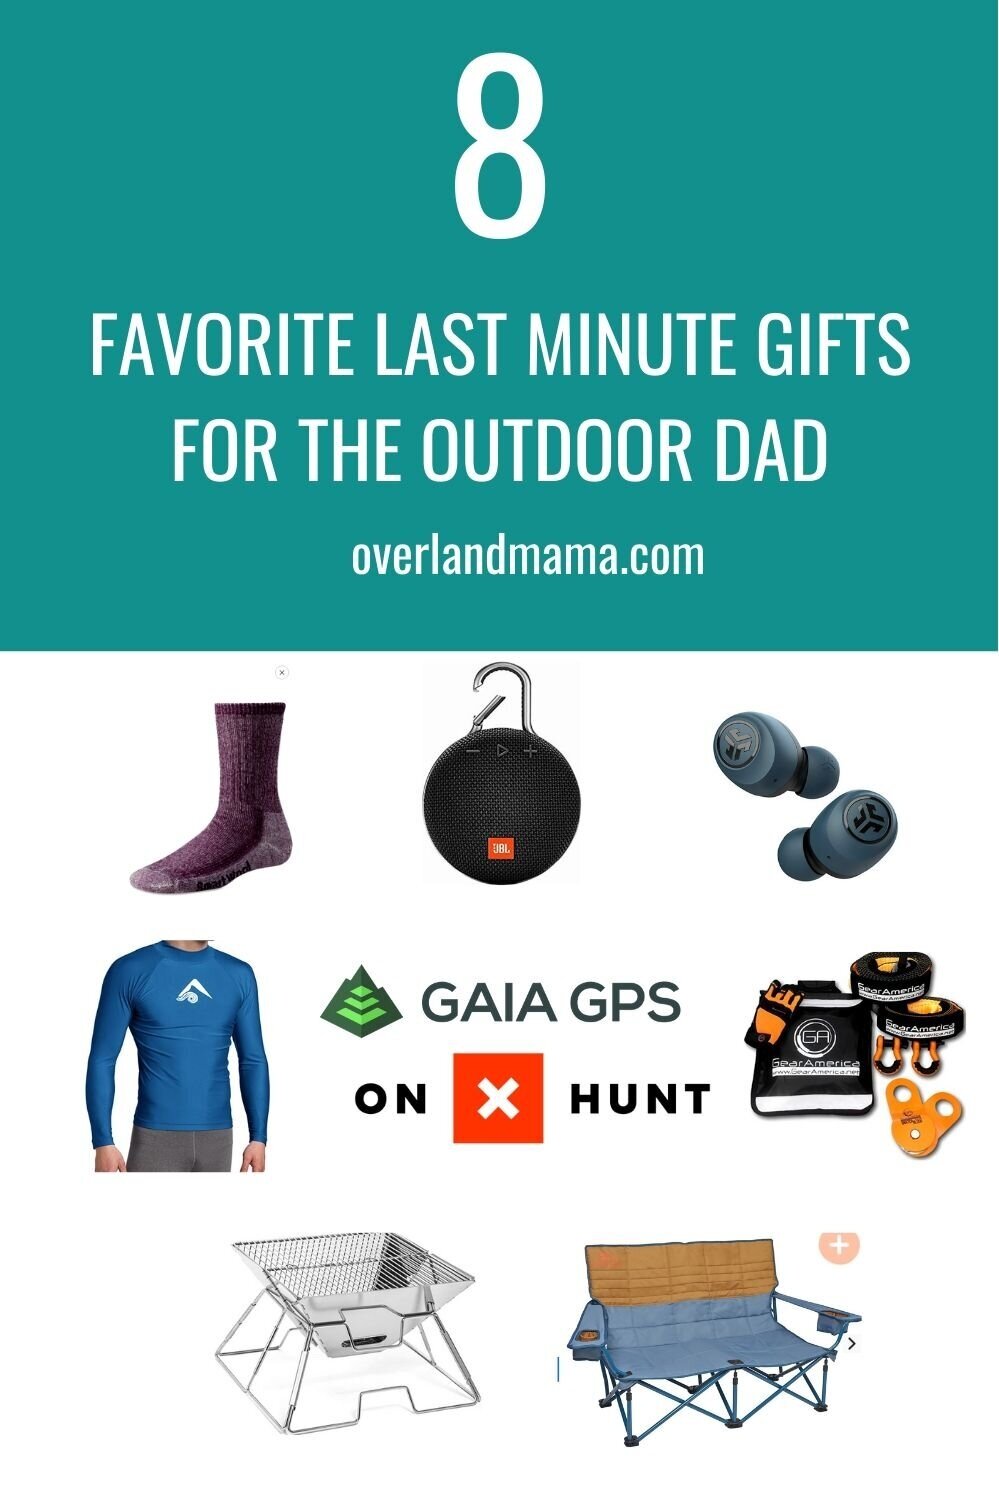 8 Favorite Last Minute Gifts for Father's Day (Outdoor and Camping